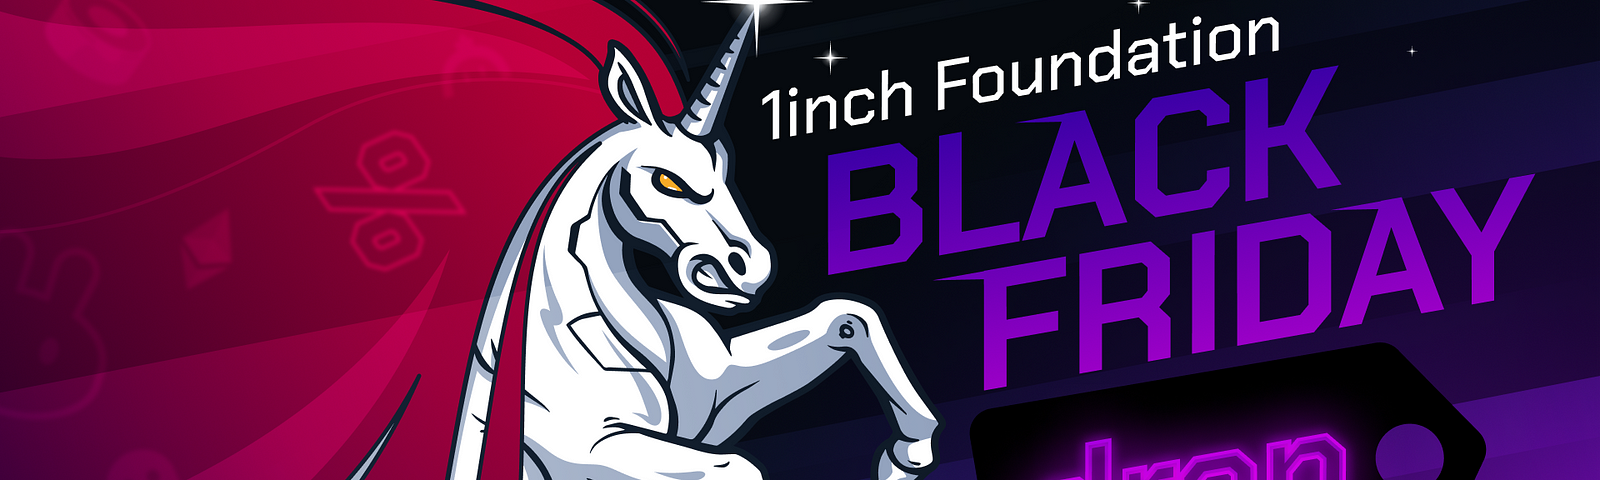 The 1inch Foundation announces Black Friday Week